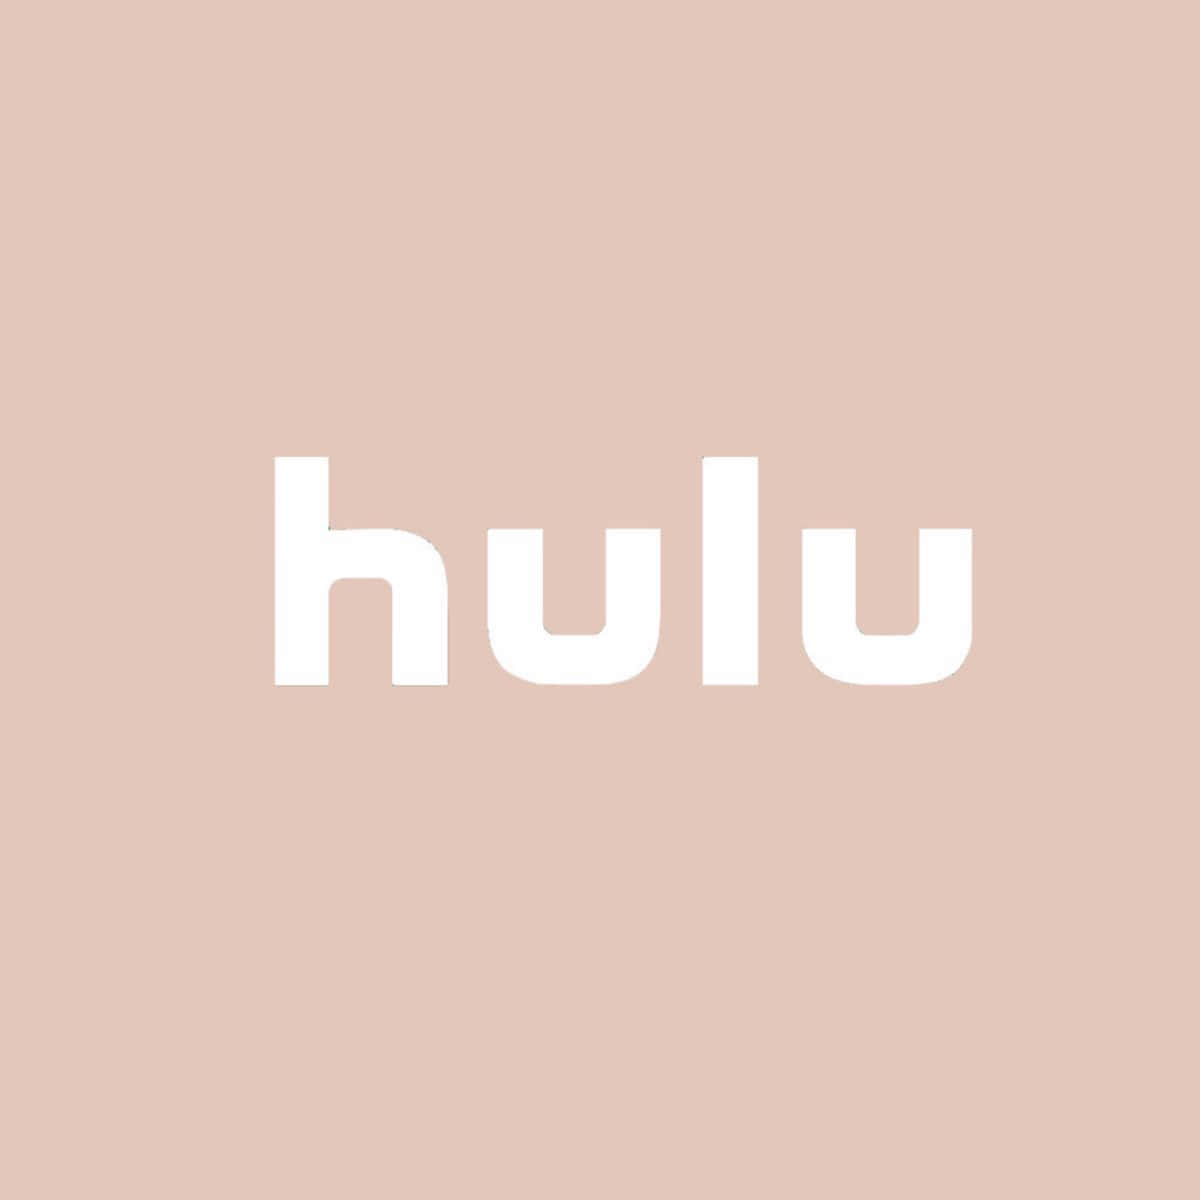 Get ready to explore the world of streaming entertainment with Hulu